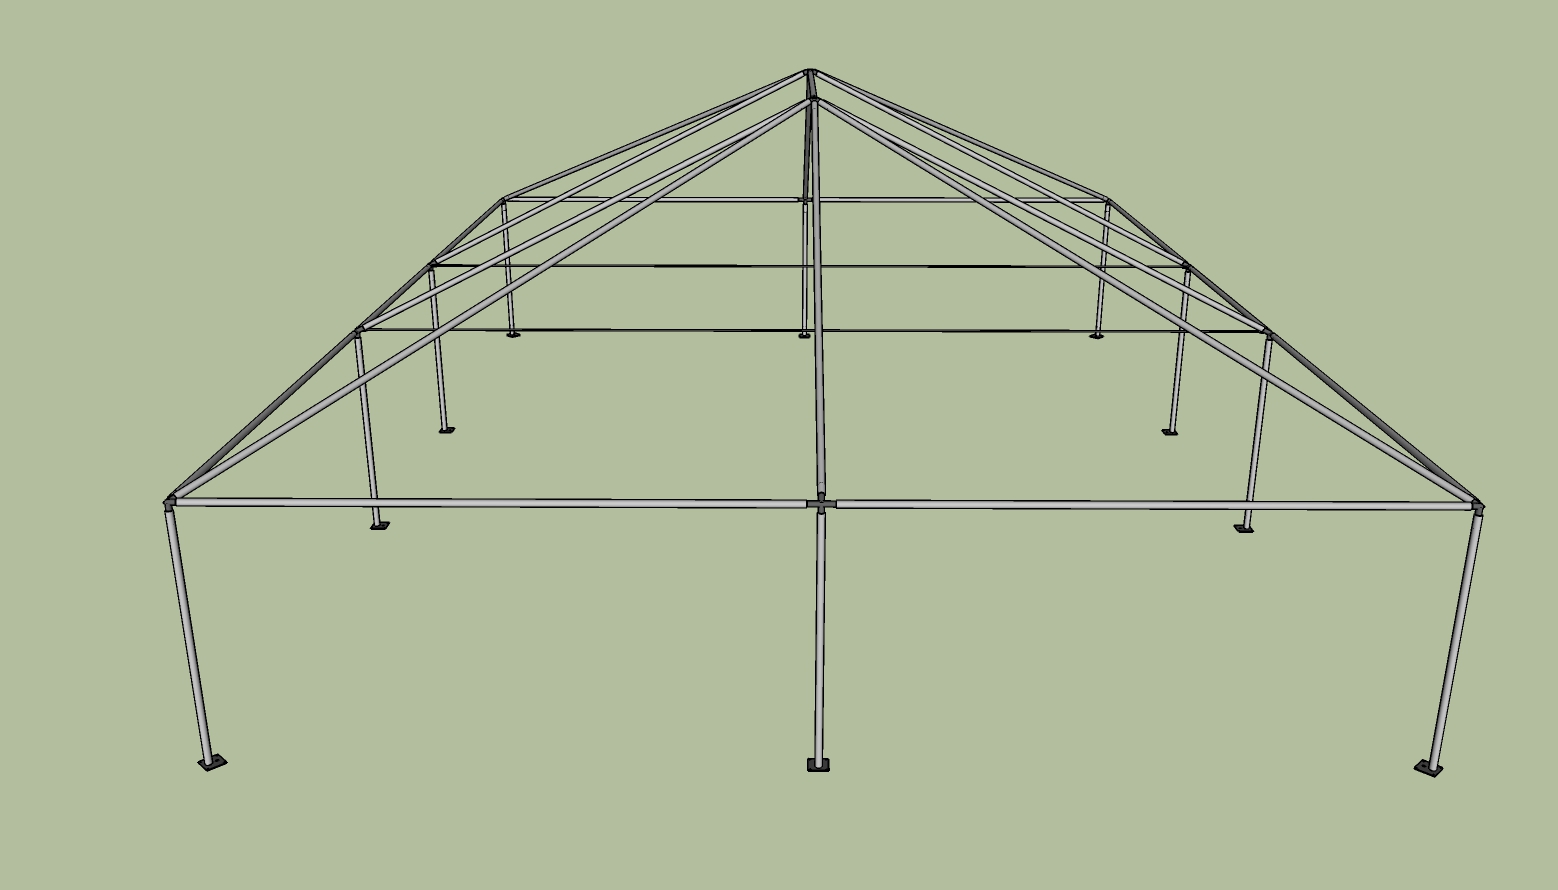 30x40 frame tent side view